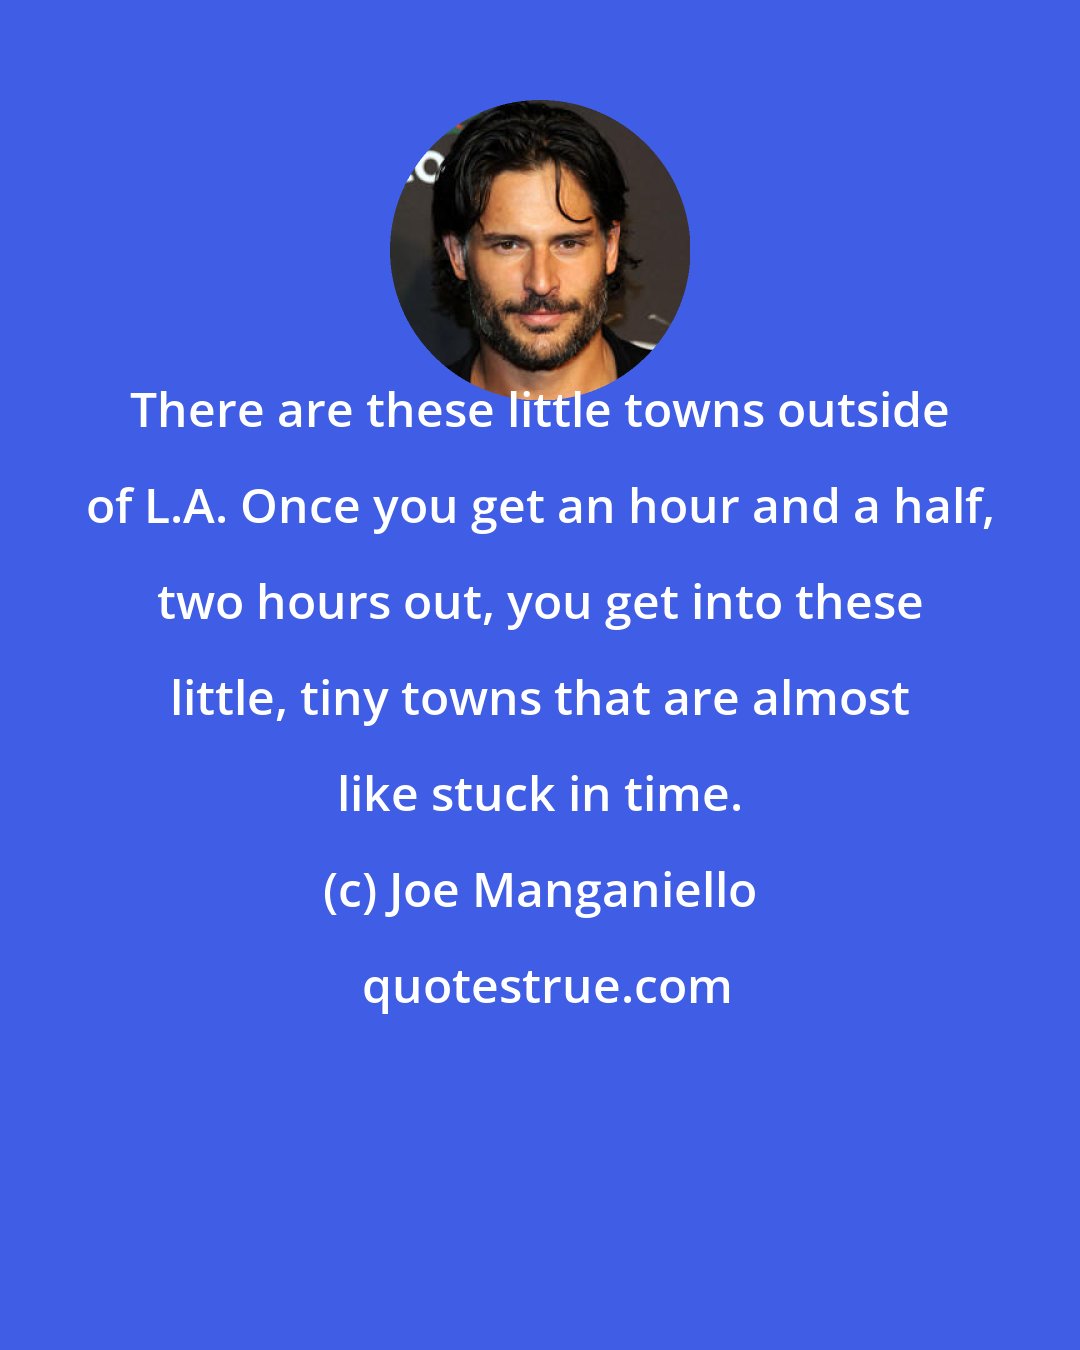 Joe Manganiello: There are these little towns outside of L.A. Once you get an hour and a half, two hours out, you get into these little, tiny towns that are almost like stuck in time.